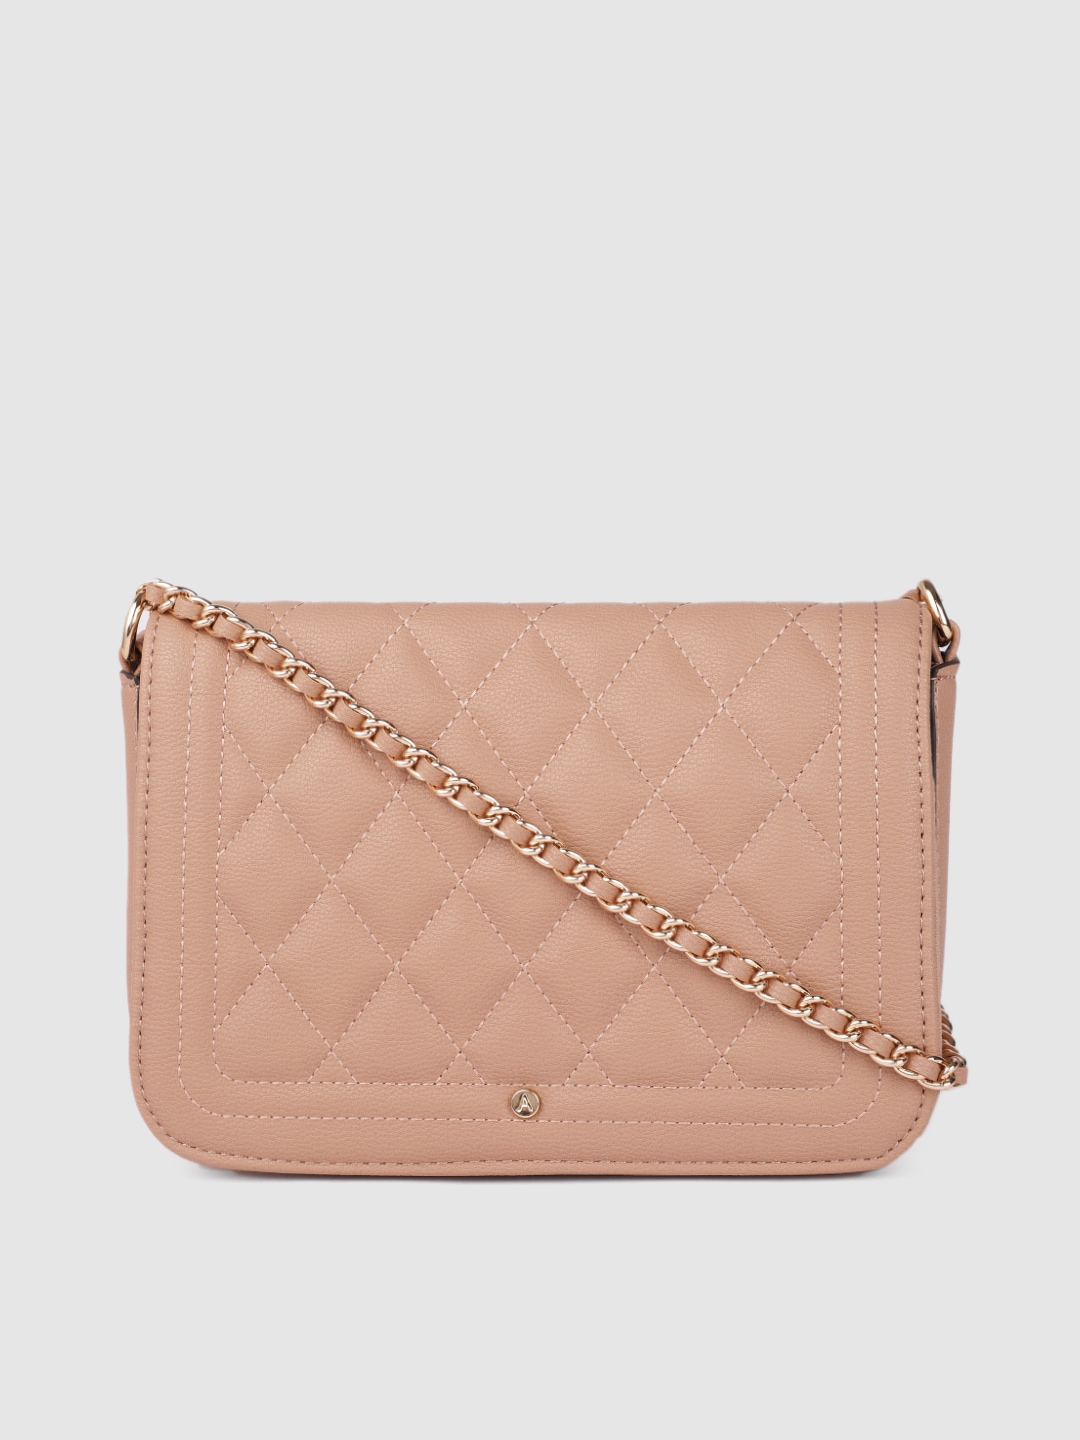 Accessorize Women Dusty Pink PU Structured Quilted Sling Bag Price in India